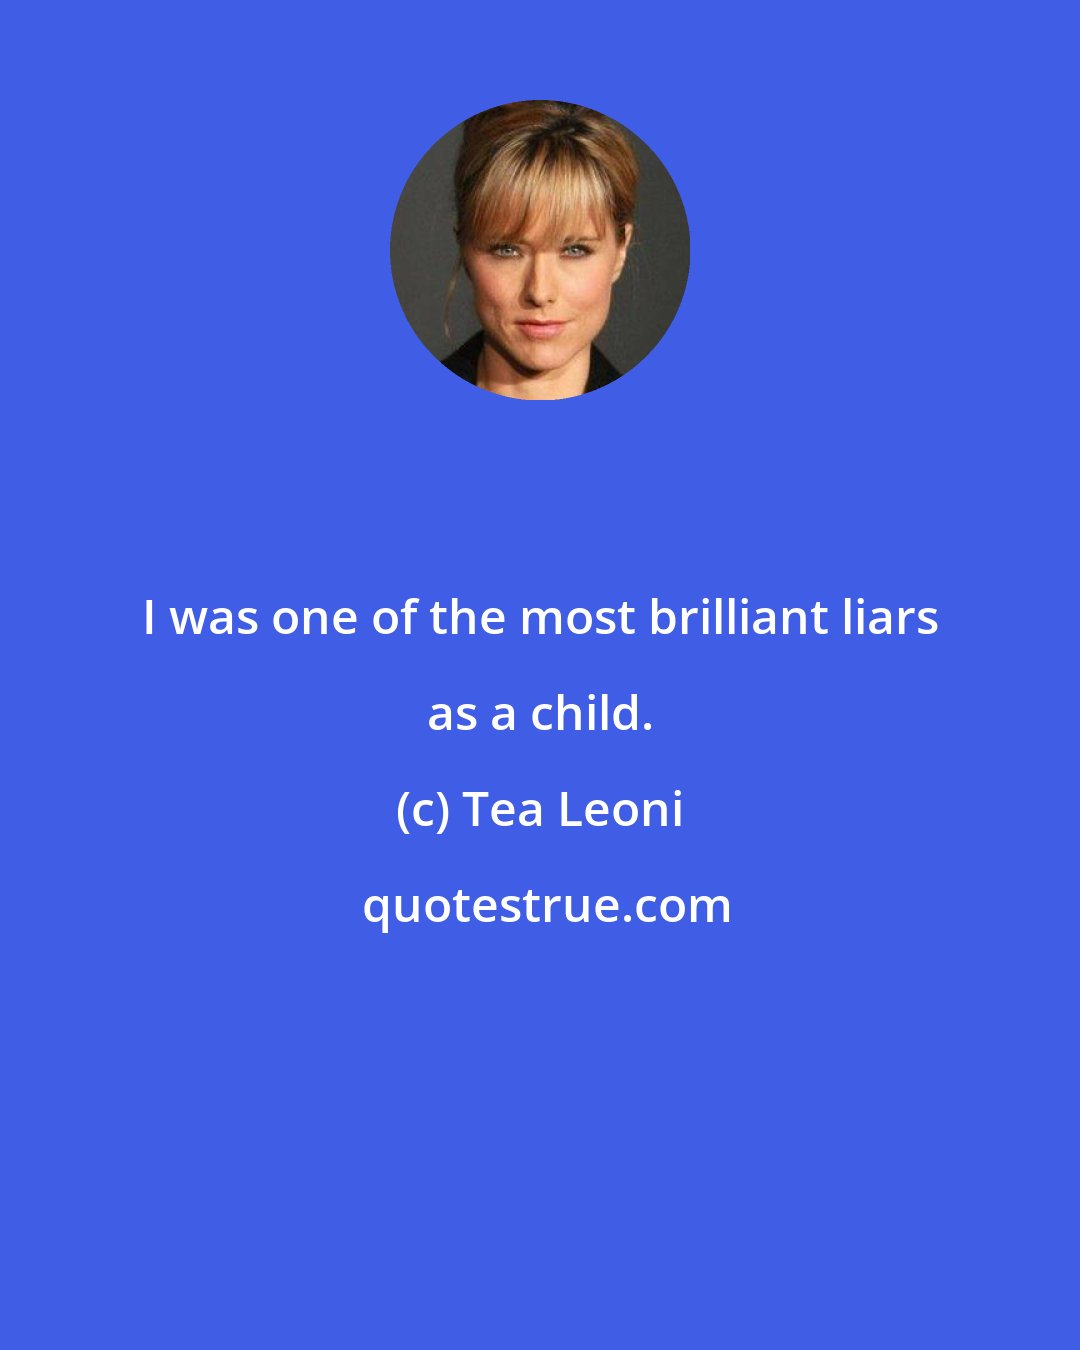 Tea Leoni: I was one of the most brilliant liars as a child.